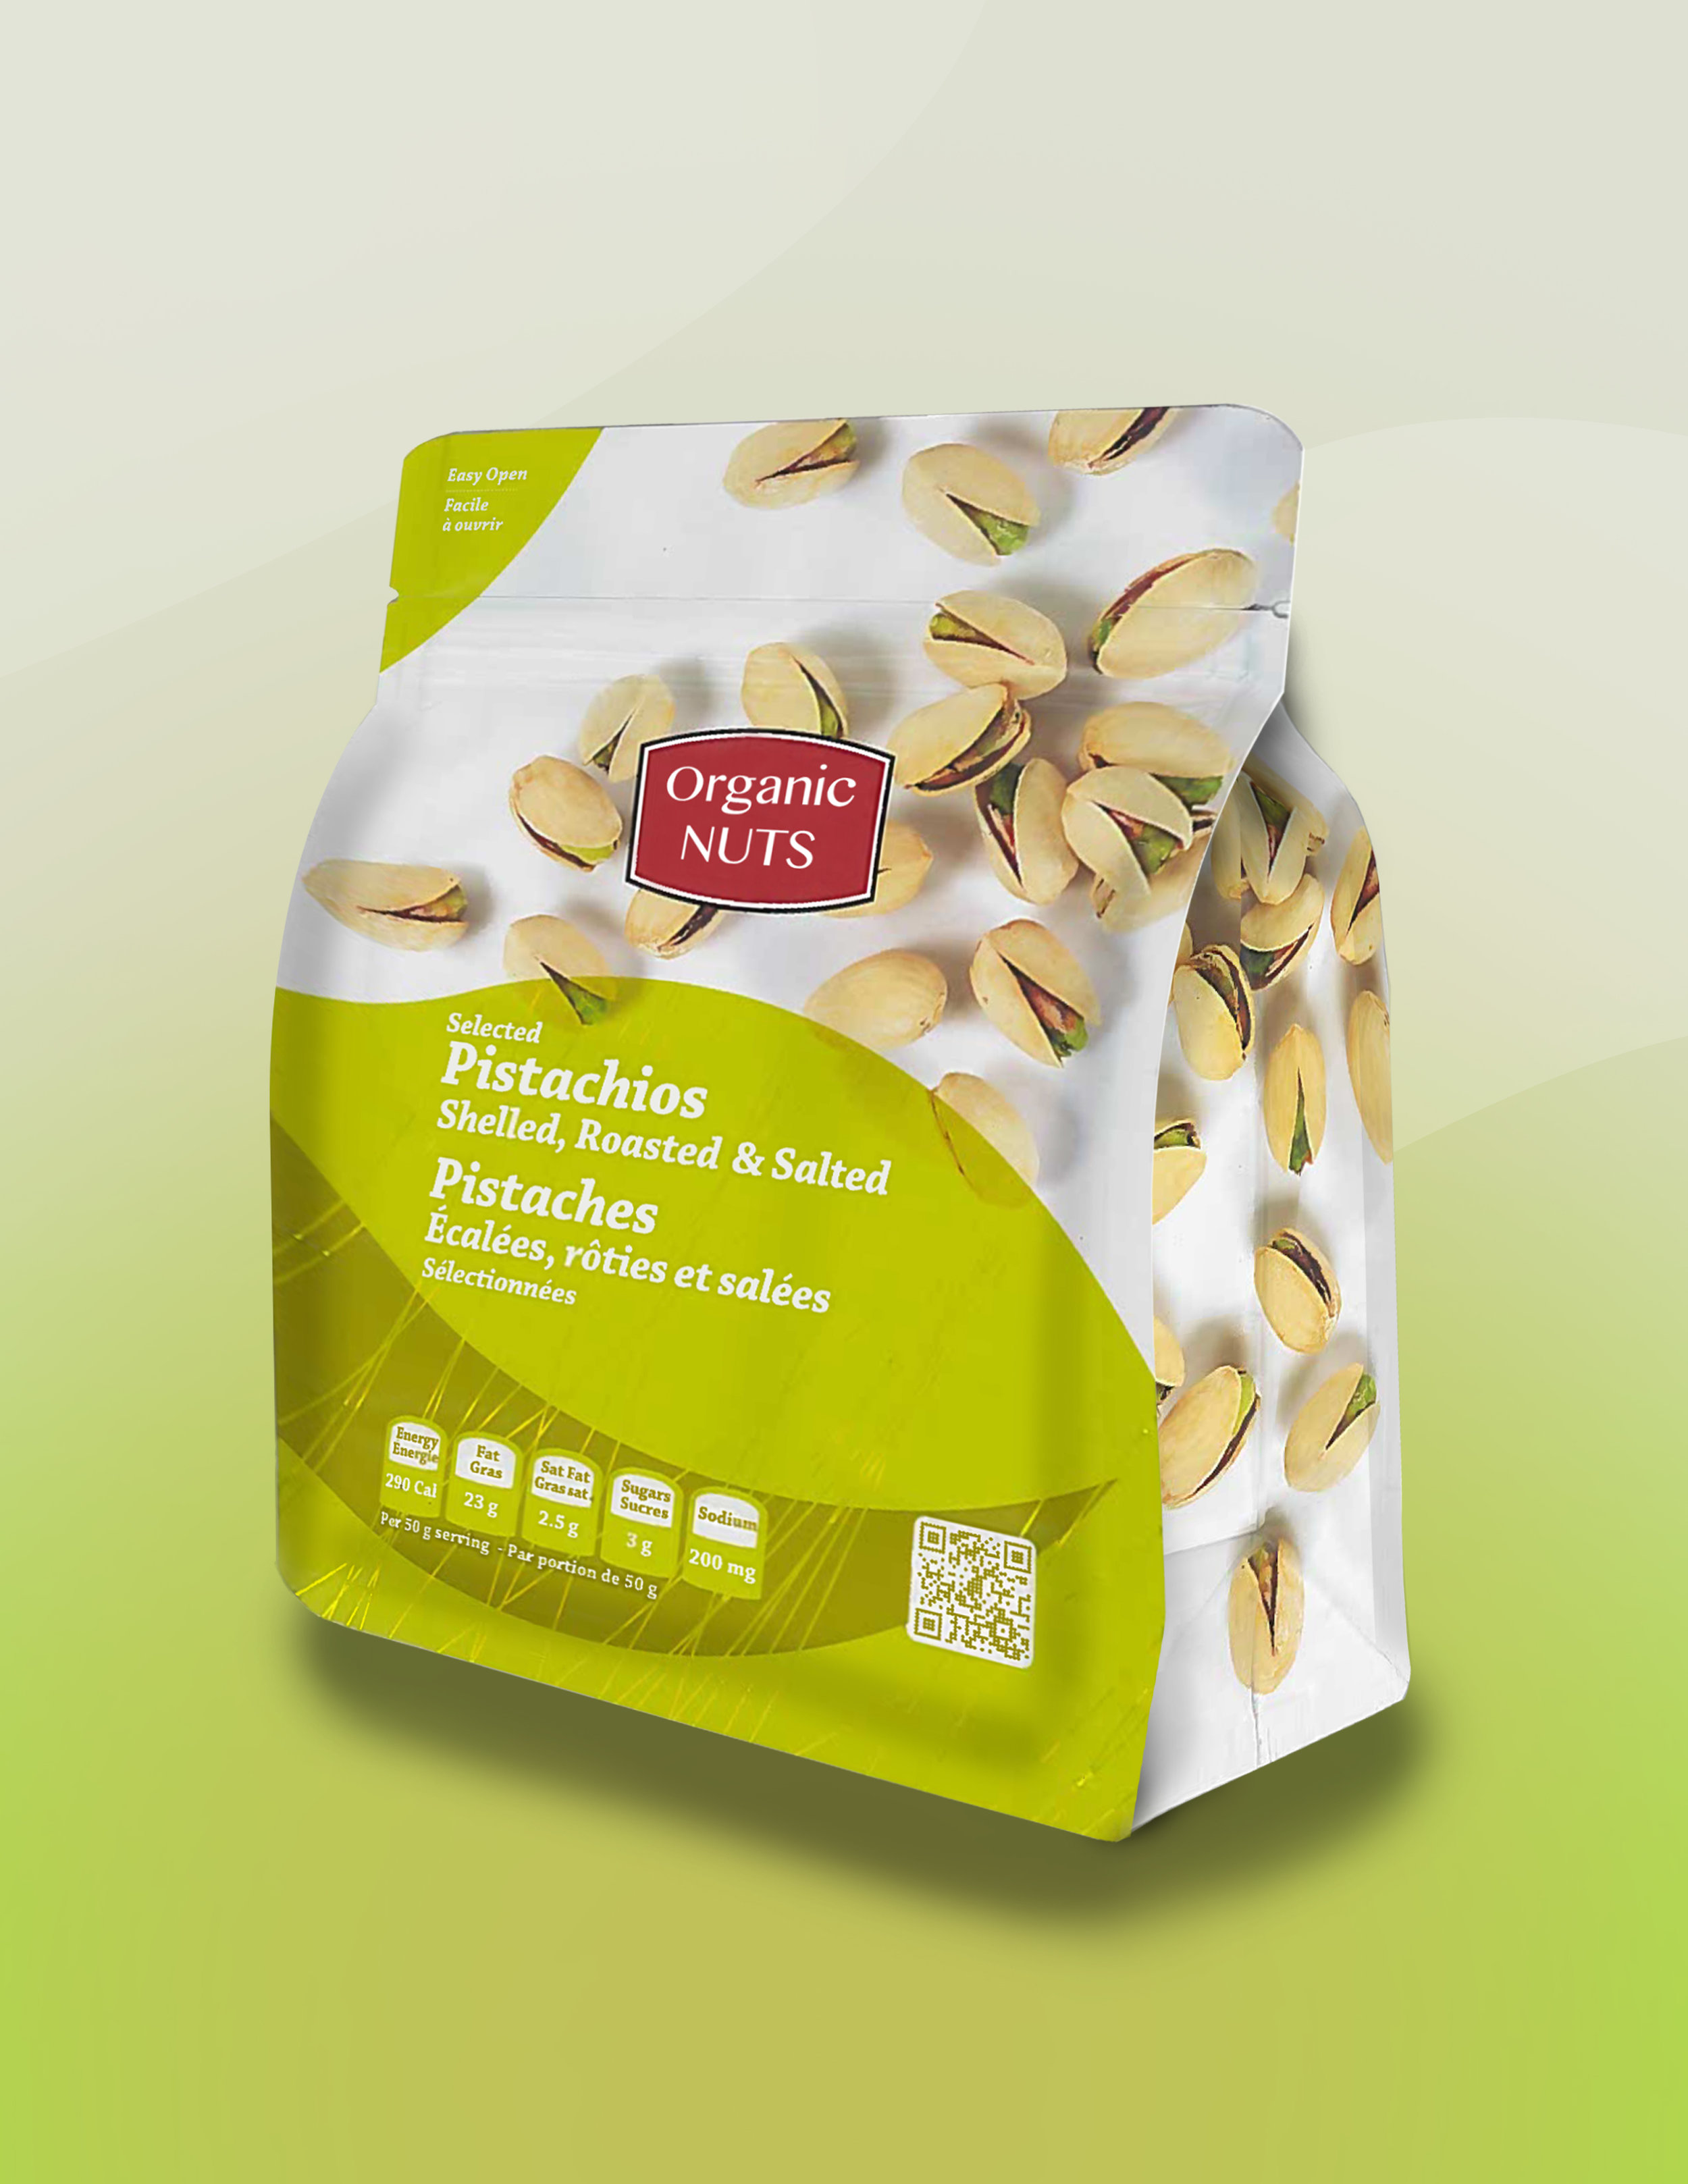 Package of Oragnic Pistachio nuts